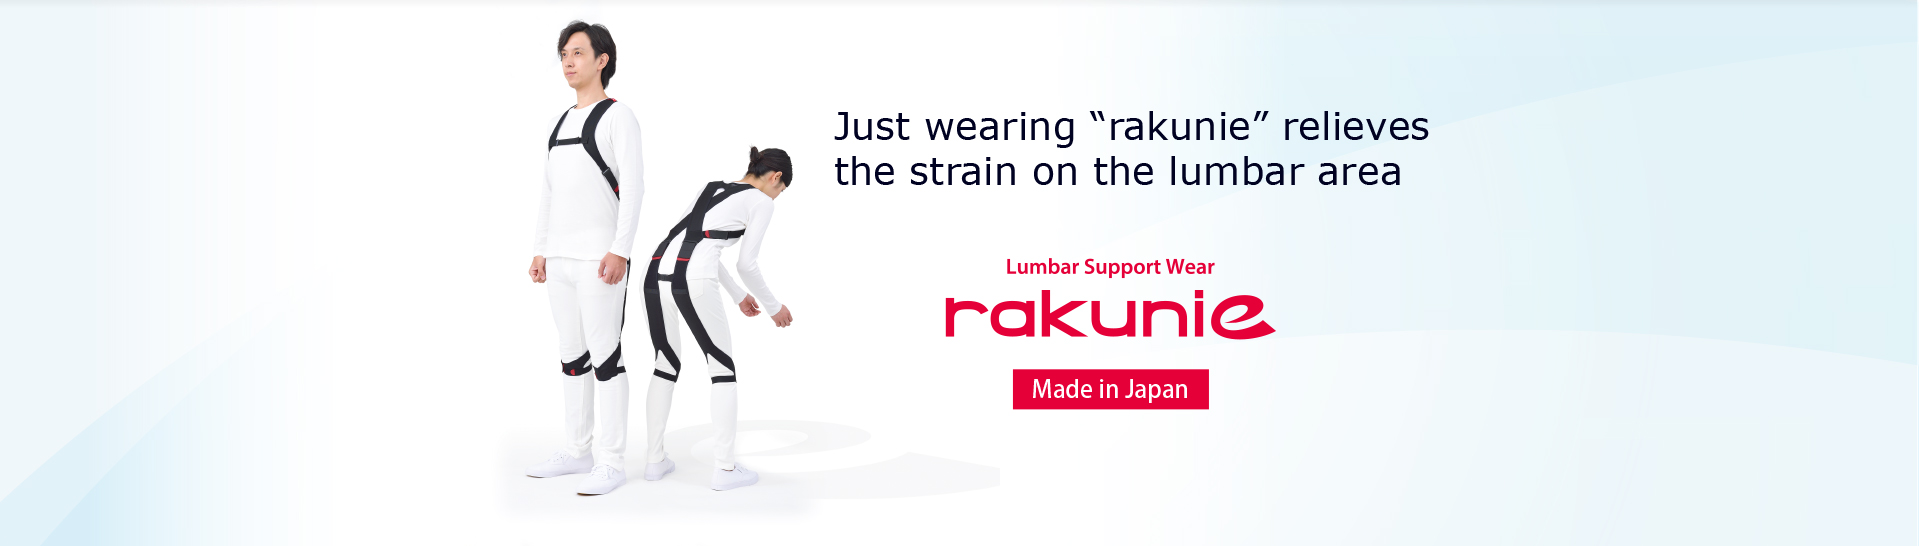 Just wearing “rakunie” relieves the strain on the lumbar area